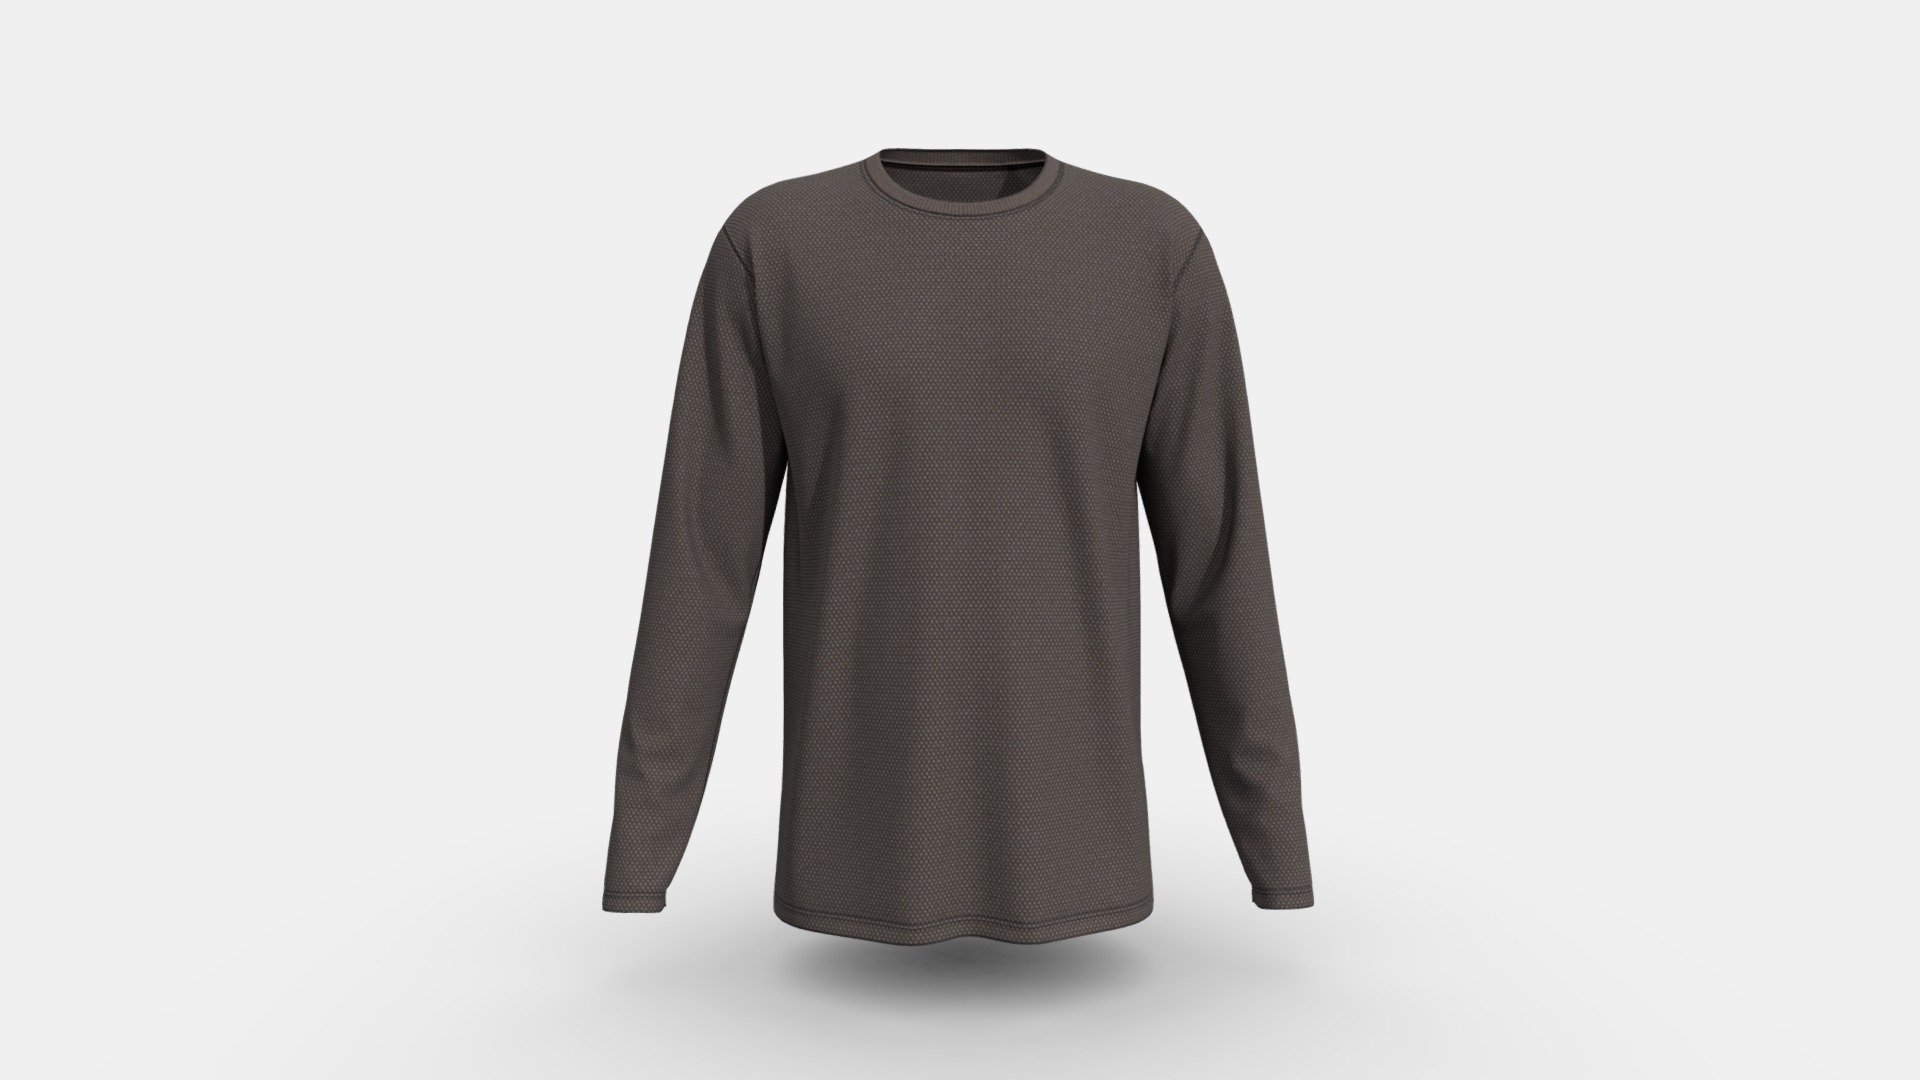 Regular Fit Streetwear LS T-shirt
Version V1.0

Realistic high detailed Mens sweartShirt with high resolution textures. Model created by our unique processing &amp; Optimized for 3D web and AR / VR

Features

Optimized &amp; NON-Optimized obj model with 4K texture included
* Optimized for AR/VR/MR
* 4K fabric texture and details
* Optimized model is 1.73MB
* NON-Optimized model is 16.2MB
* Knit fabric texture and print details included
* GLB file in 2k texture size is 3.93mb
* GLB file in 4k texture size is 15.3mb (Game &amp; Animation Ready)
* Suitable for web application configurator development.
* Fully unwrap UV
* The model has 1 material
* Includes high detailed normal map
* Unit measurement was inch
* Triangular Mesh with 15k Vertices
* Texture map: Base color, OcclusionRoughnessMetallic(ORM), Normal

Tpose  available on request

For more details or custom order send email: hello@binarycloth.com

Website:binarycloth.com - Mens high-quality, Minimalistic LS T-shirt - Buy Royalty Free 3D model by BINARYCLOTH (@binaryclothofficial) 3d model